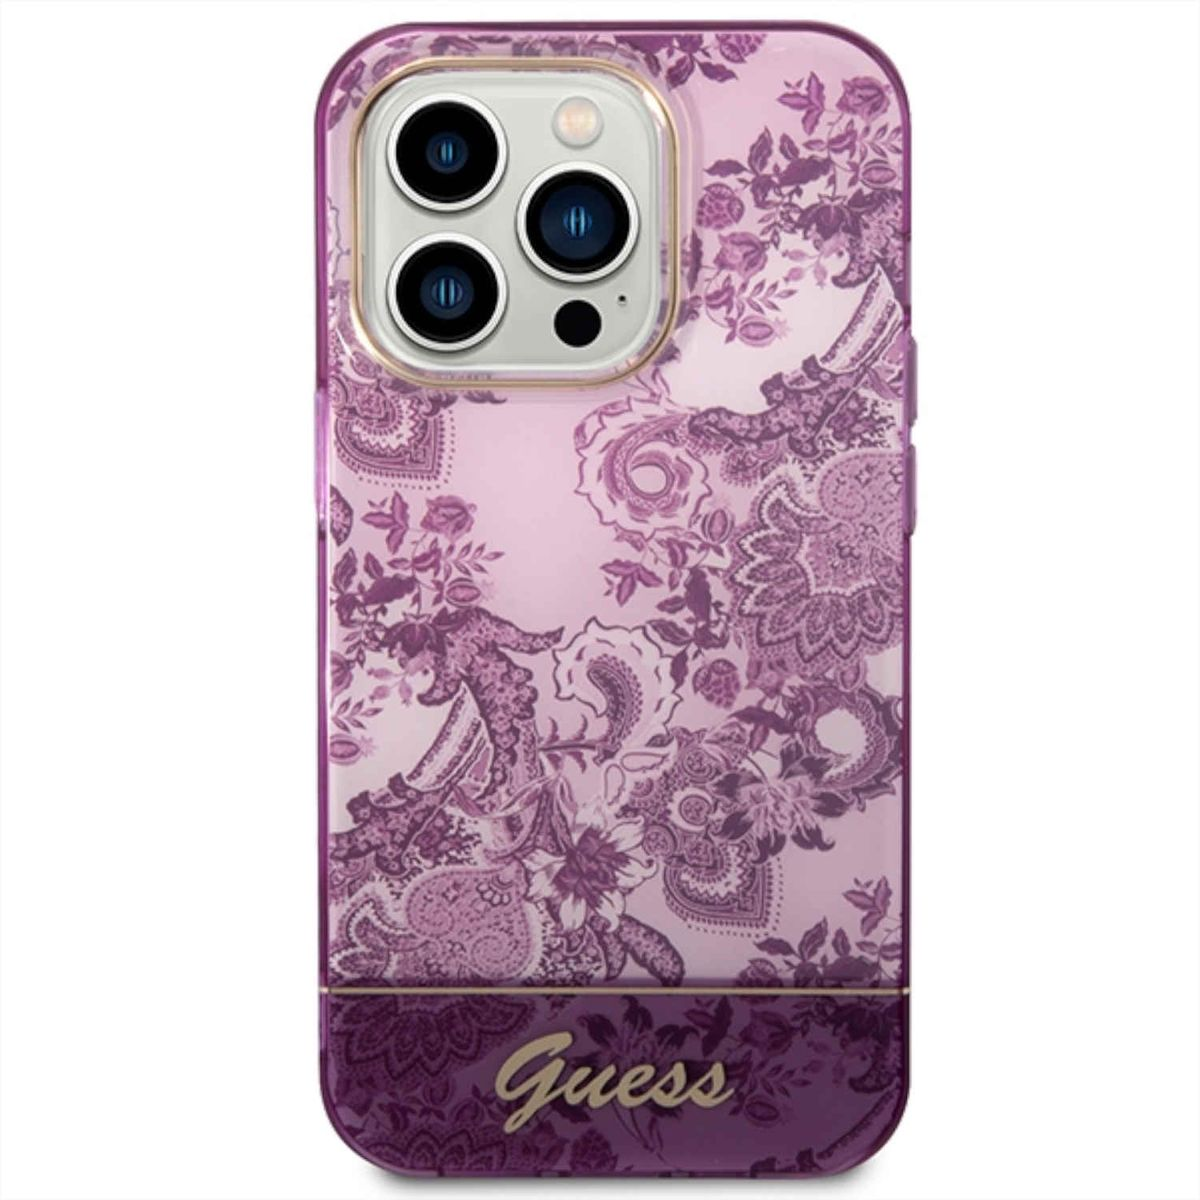 14 iPhone Leder PU Backcover, GUESS Pro, / Lila Apple, TPU Muster Hülle, PC Design /